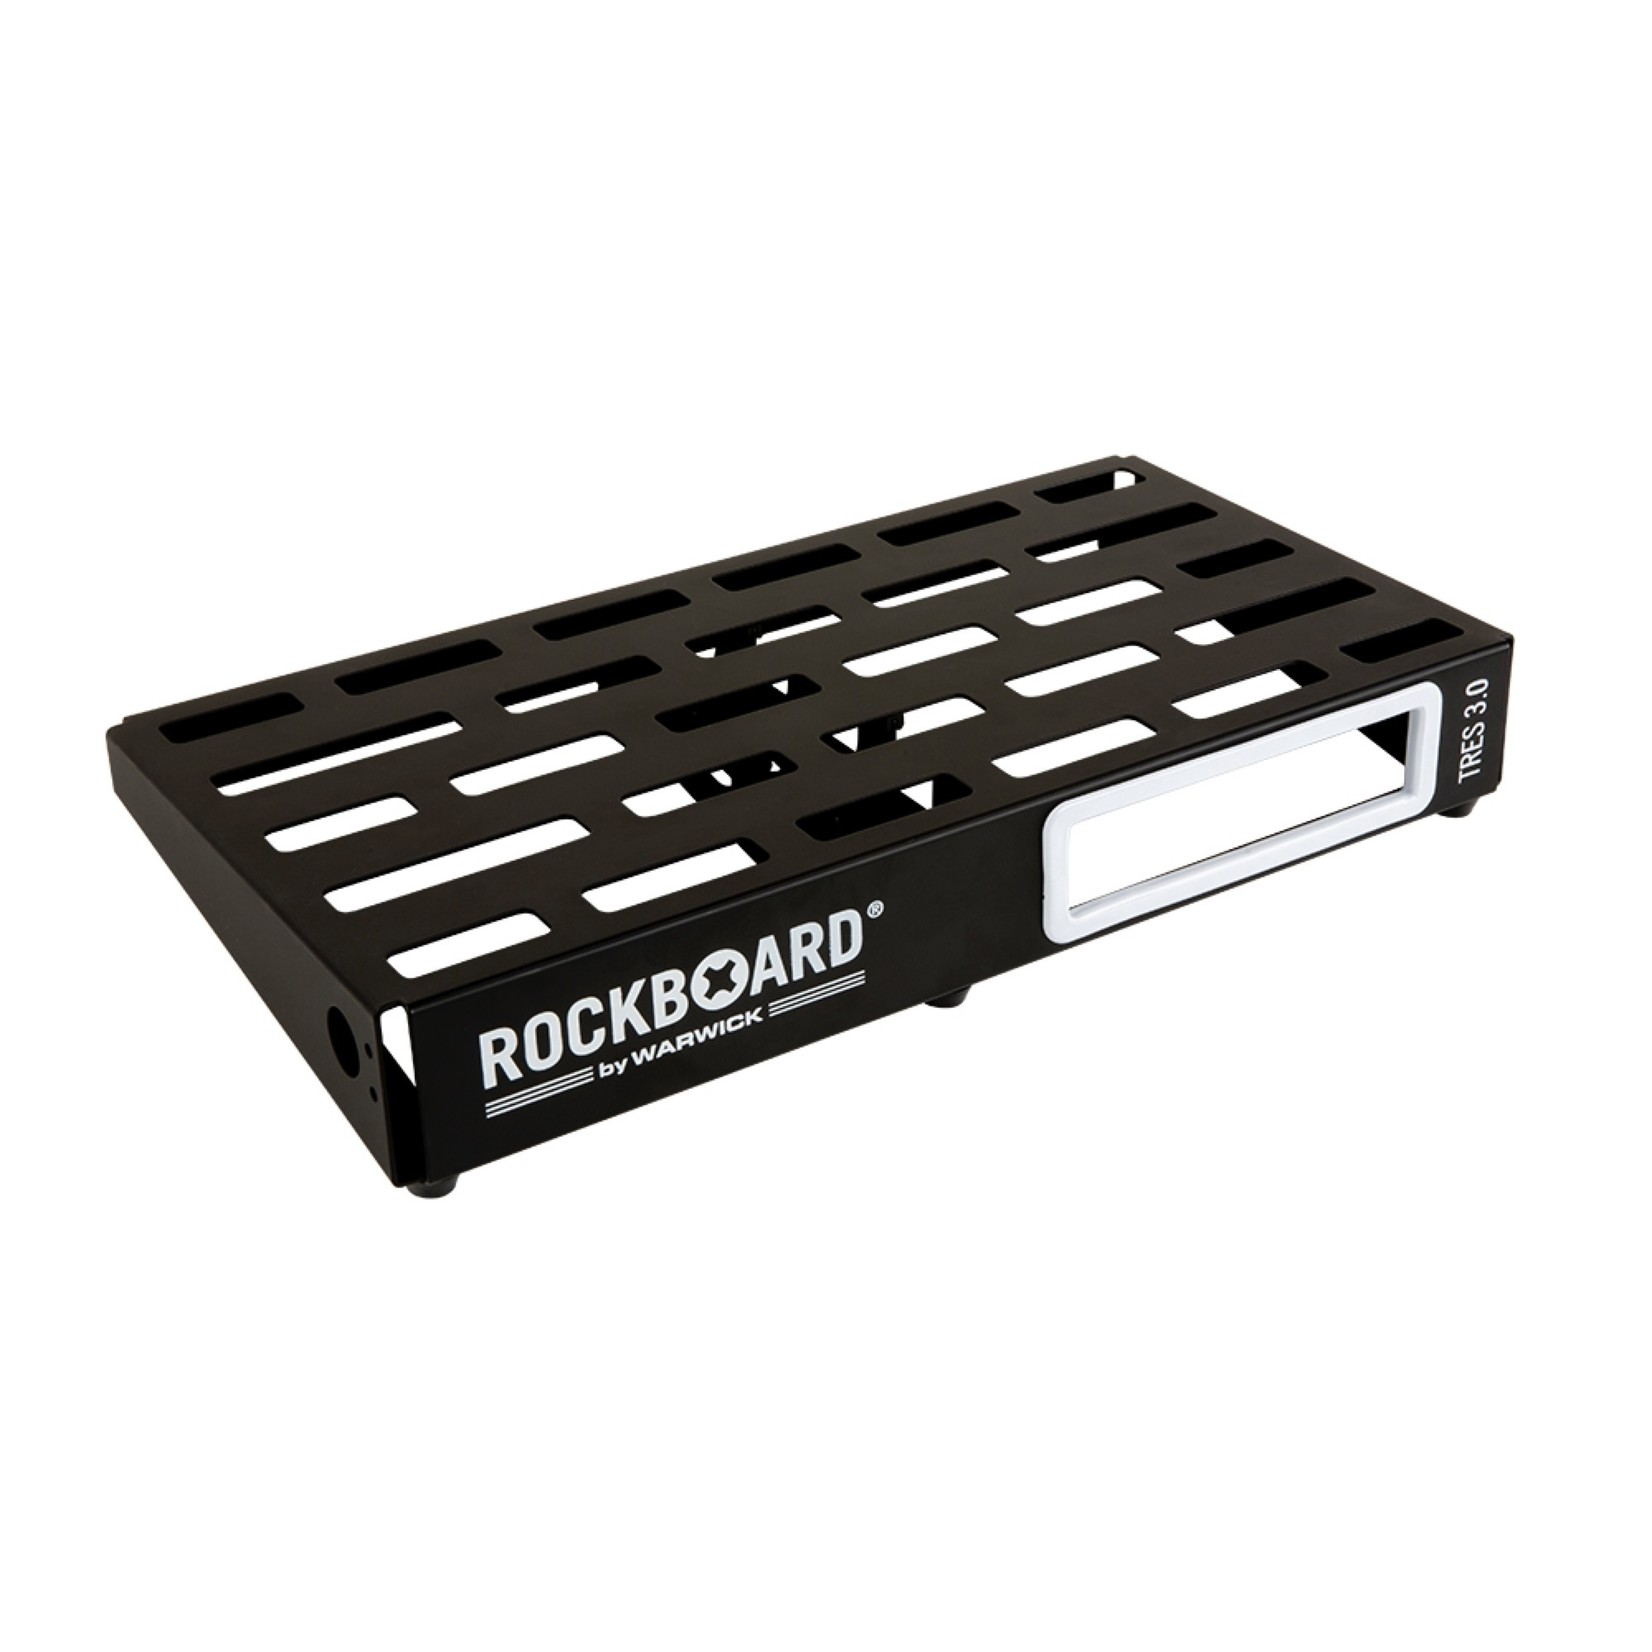 Rockboard RockBoard TRES 3.0, Pedalboard with Gig Bag, for 5-10 effects pedals (approx. 17.3" x 9.3")